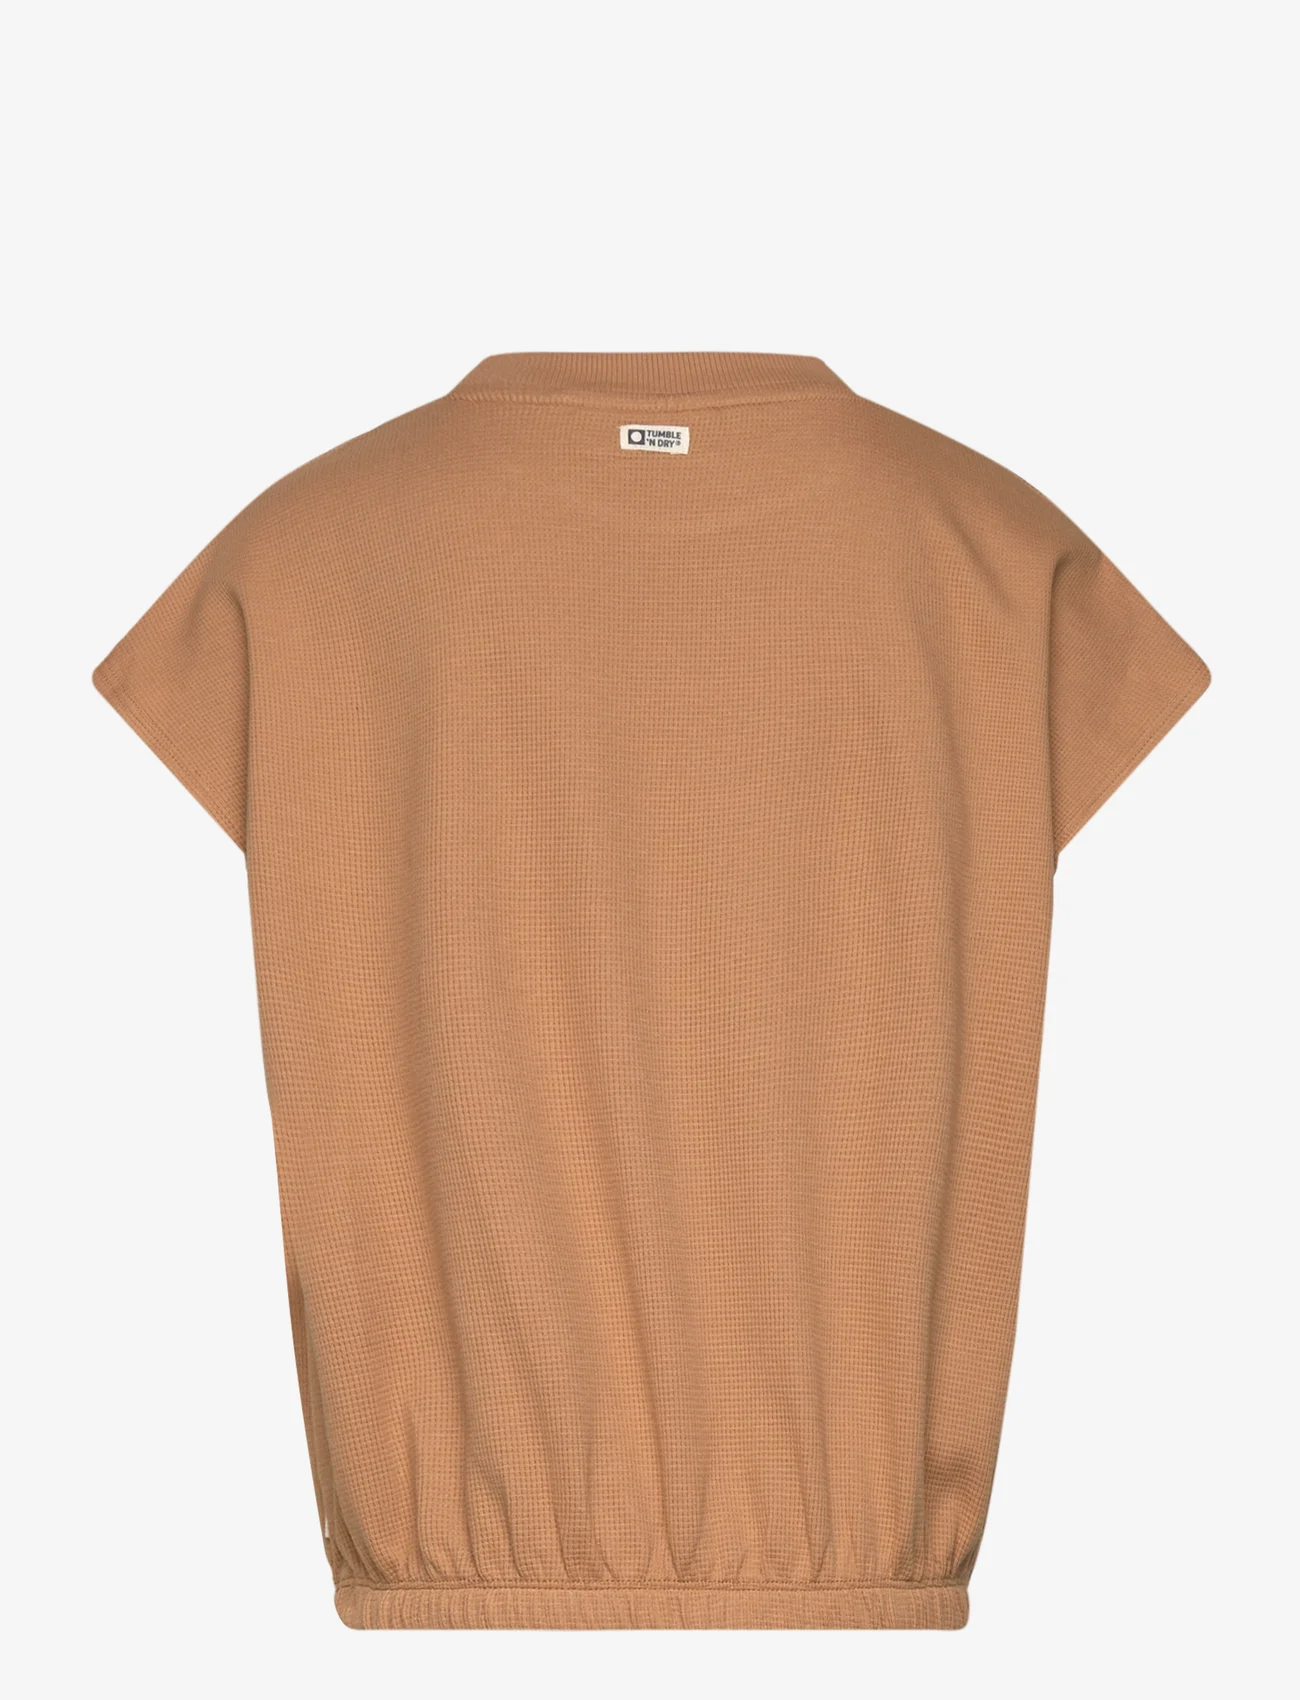 TUMBLE 'N DRY - Beverly Hills - mouwloze t-shirts - brown - 1